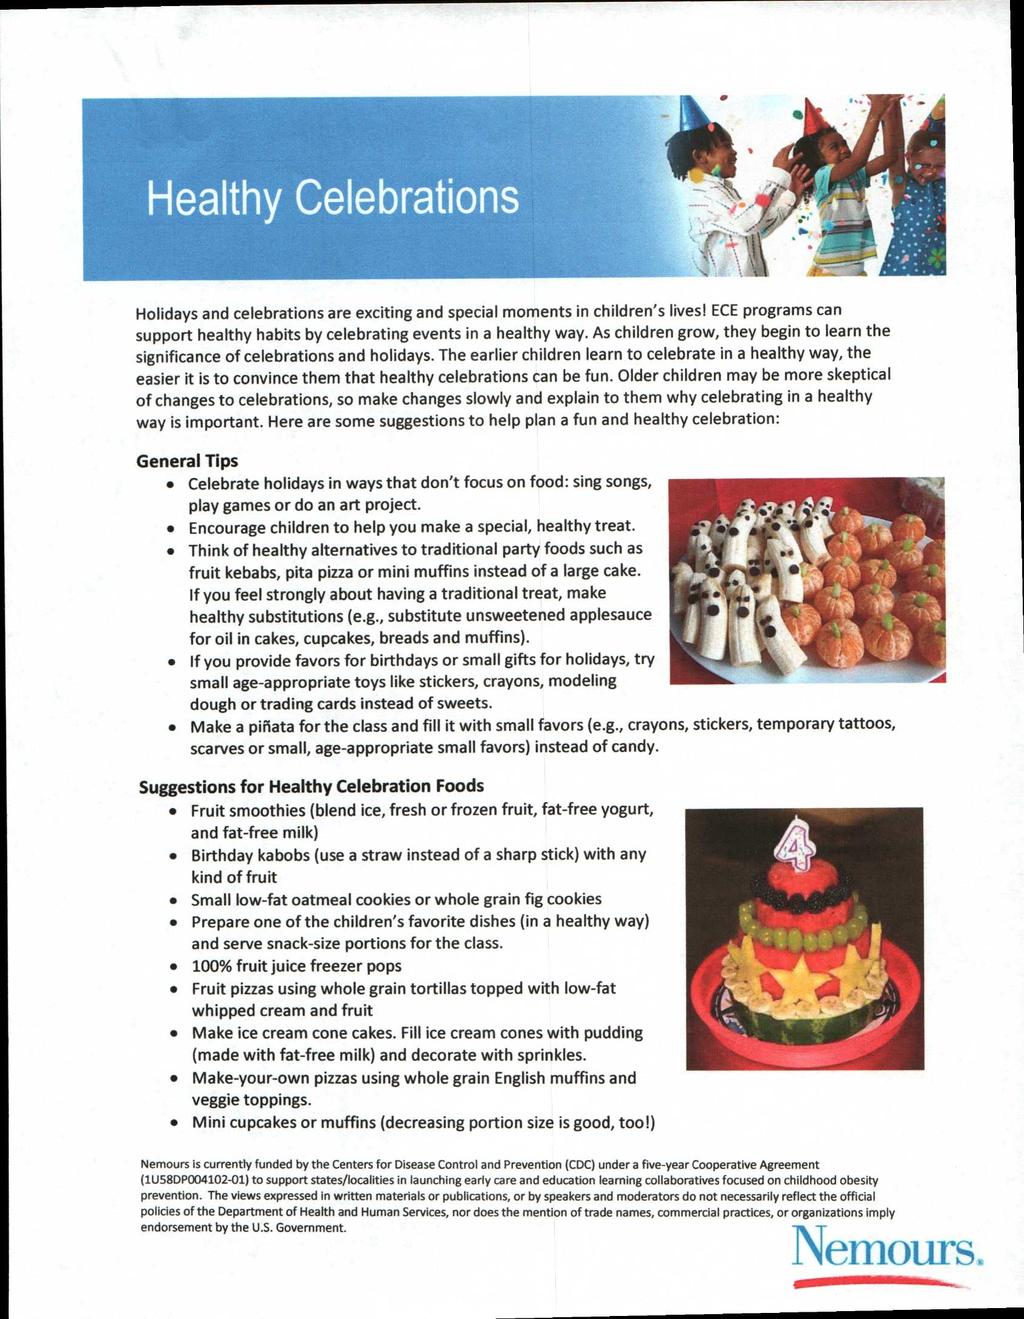 Healthy Celebrations Holidays and celebrations are exciting and special moments in children's lives! ECE programs can support healthy habits by celebrating events in a healthy way.